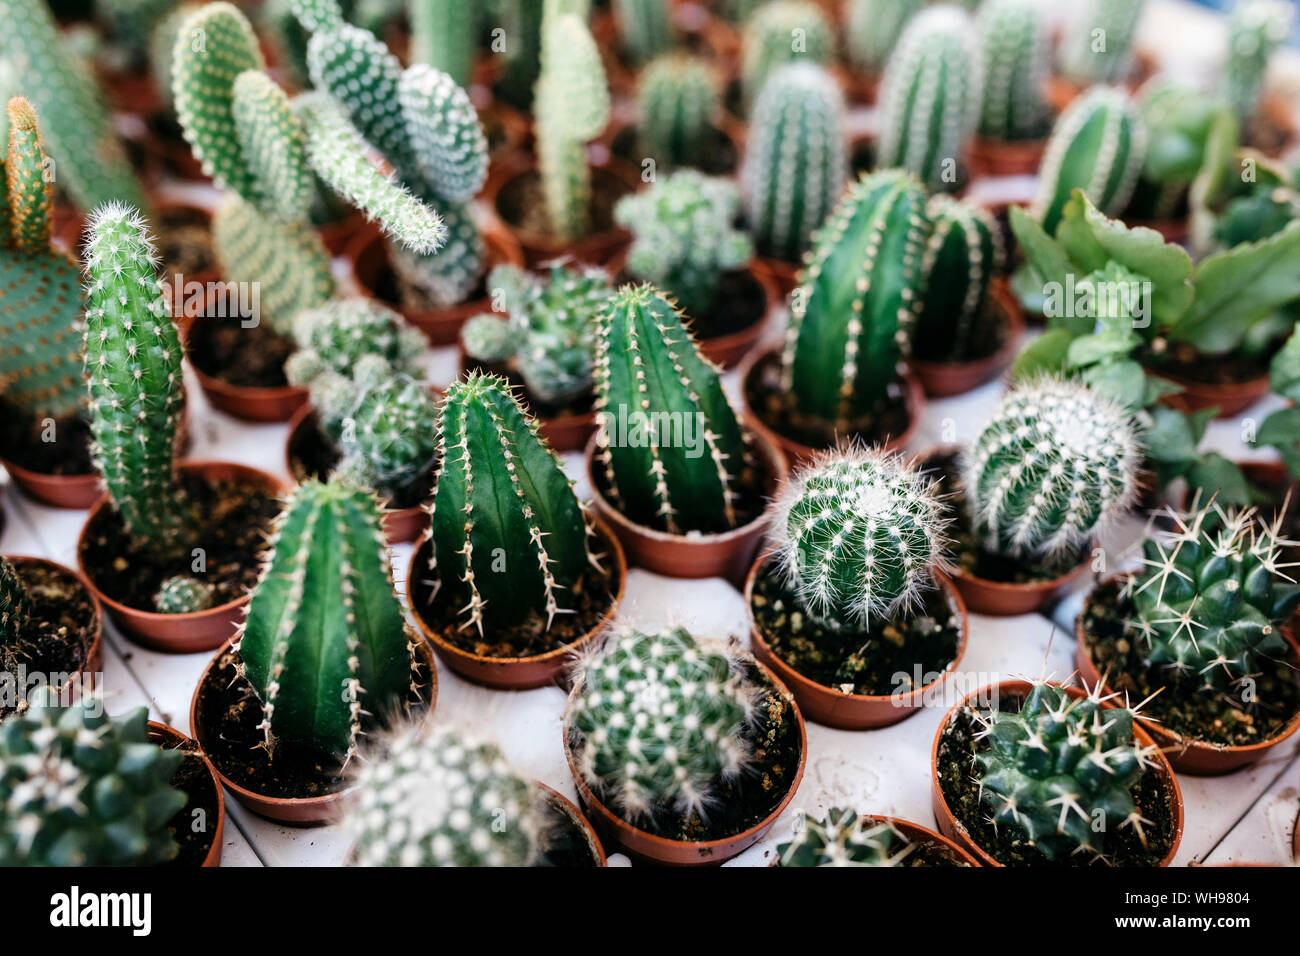 Different types of cacti in a garden center Stock Photo